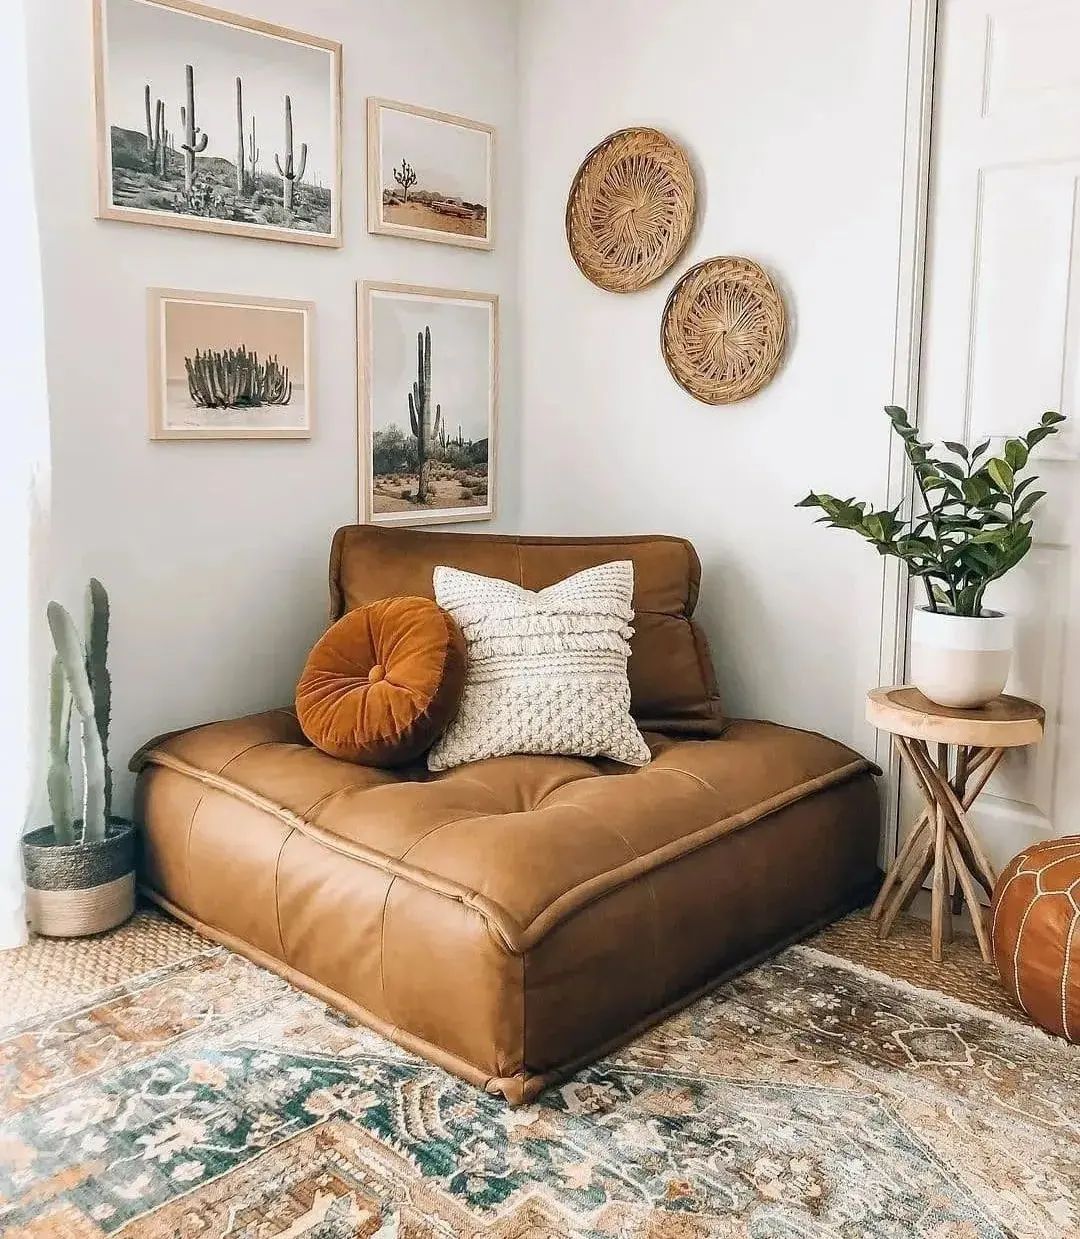 corner seating decorated with throw pillows, potted plants, wall basket decor and wall art in the Bohemian style